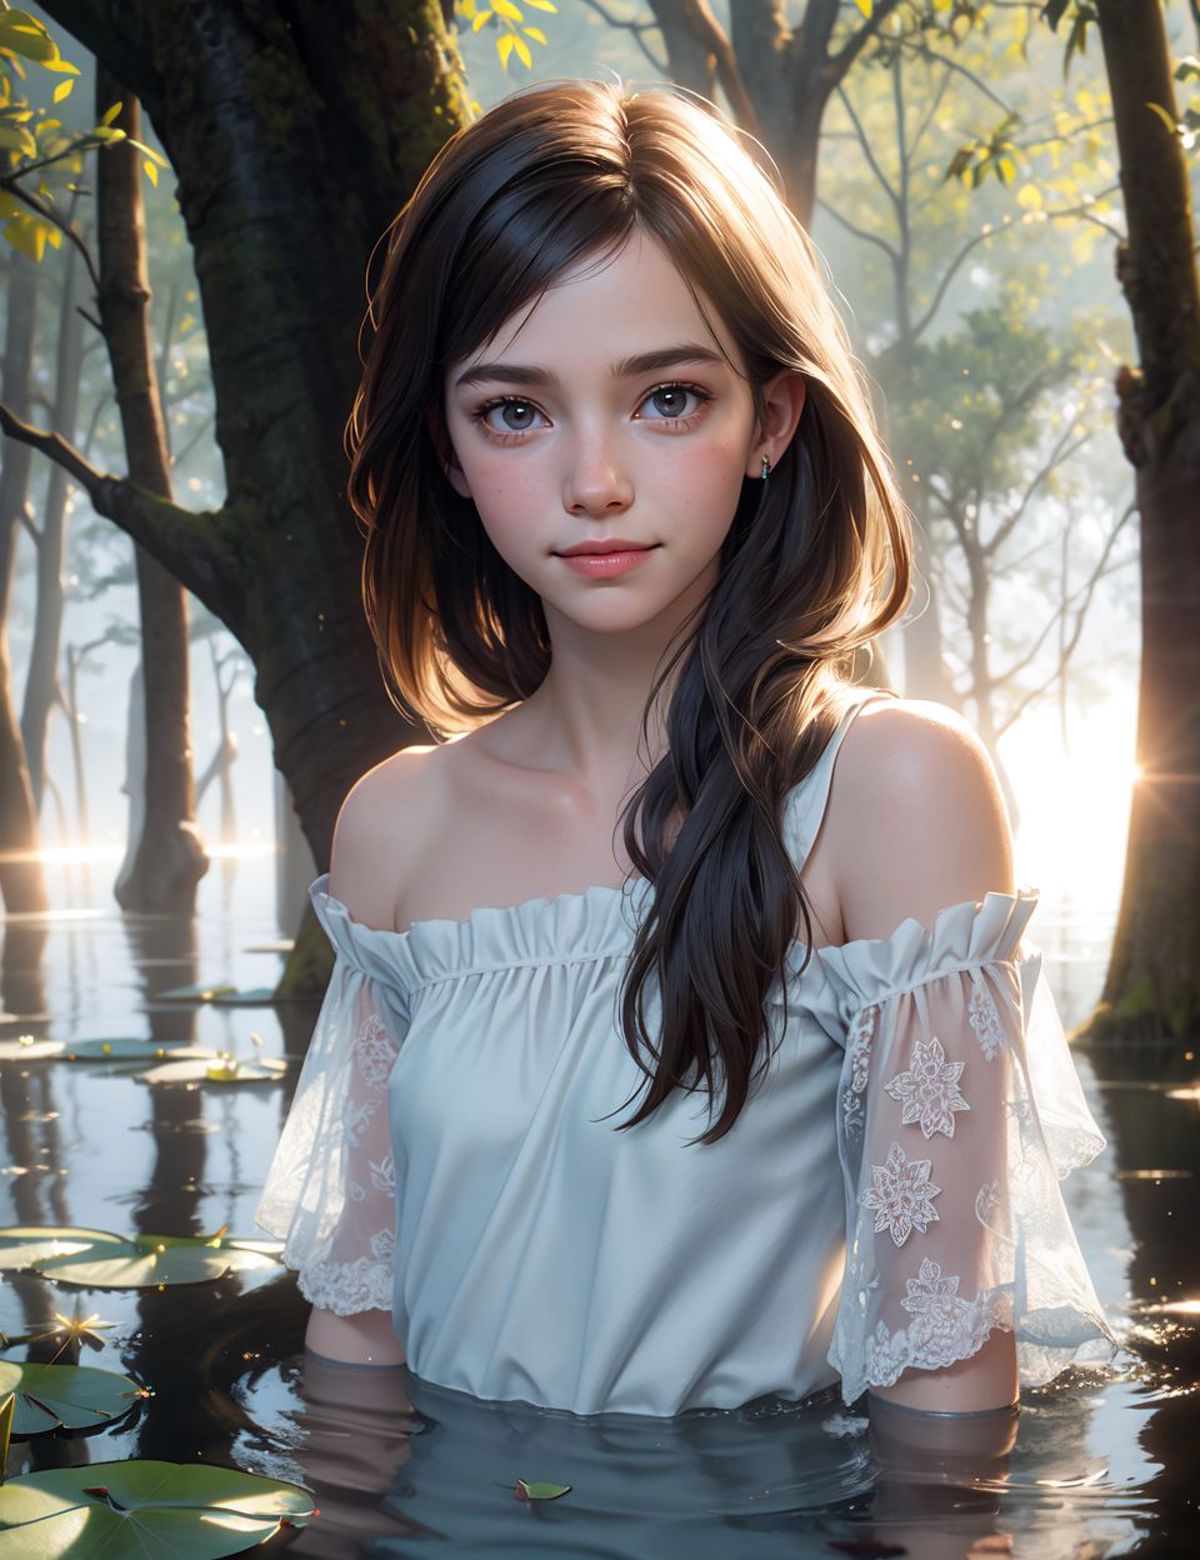 A beautiful woman with long brown hair, wearing a white lace dress, poses in a forest setting.